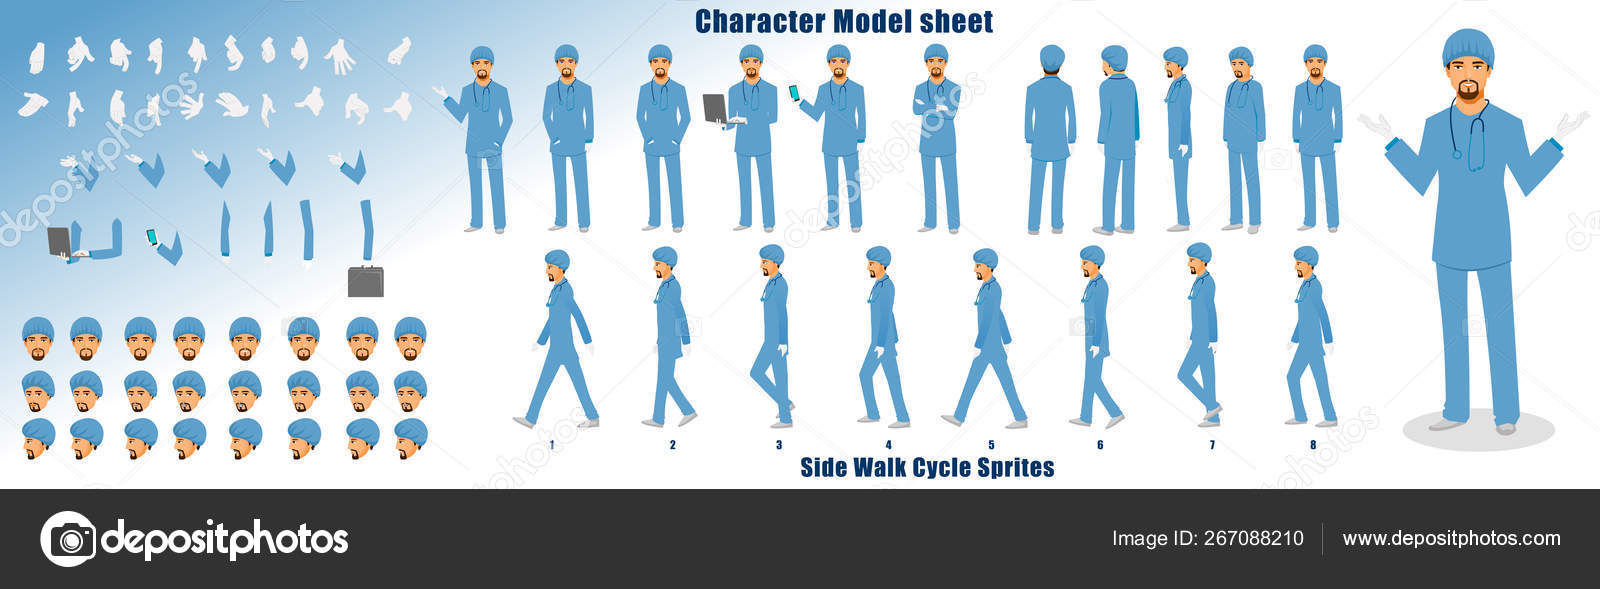 Doctor Character Model Sheetwith Walk Cycle Animation Sequence